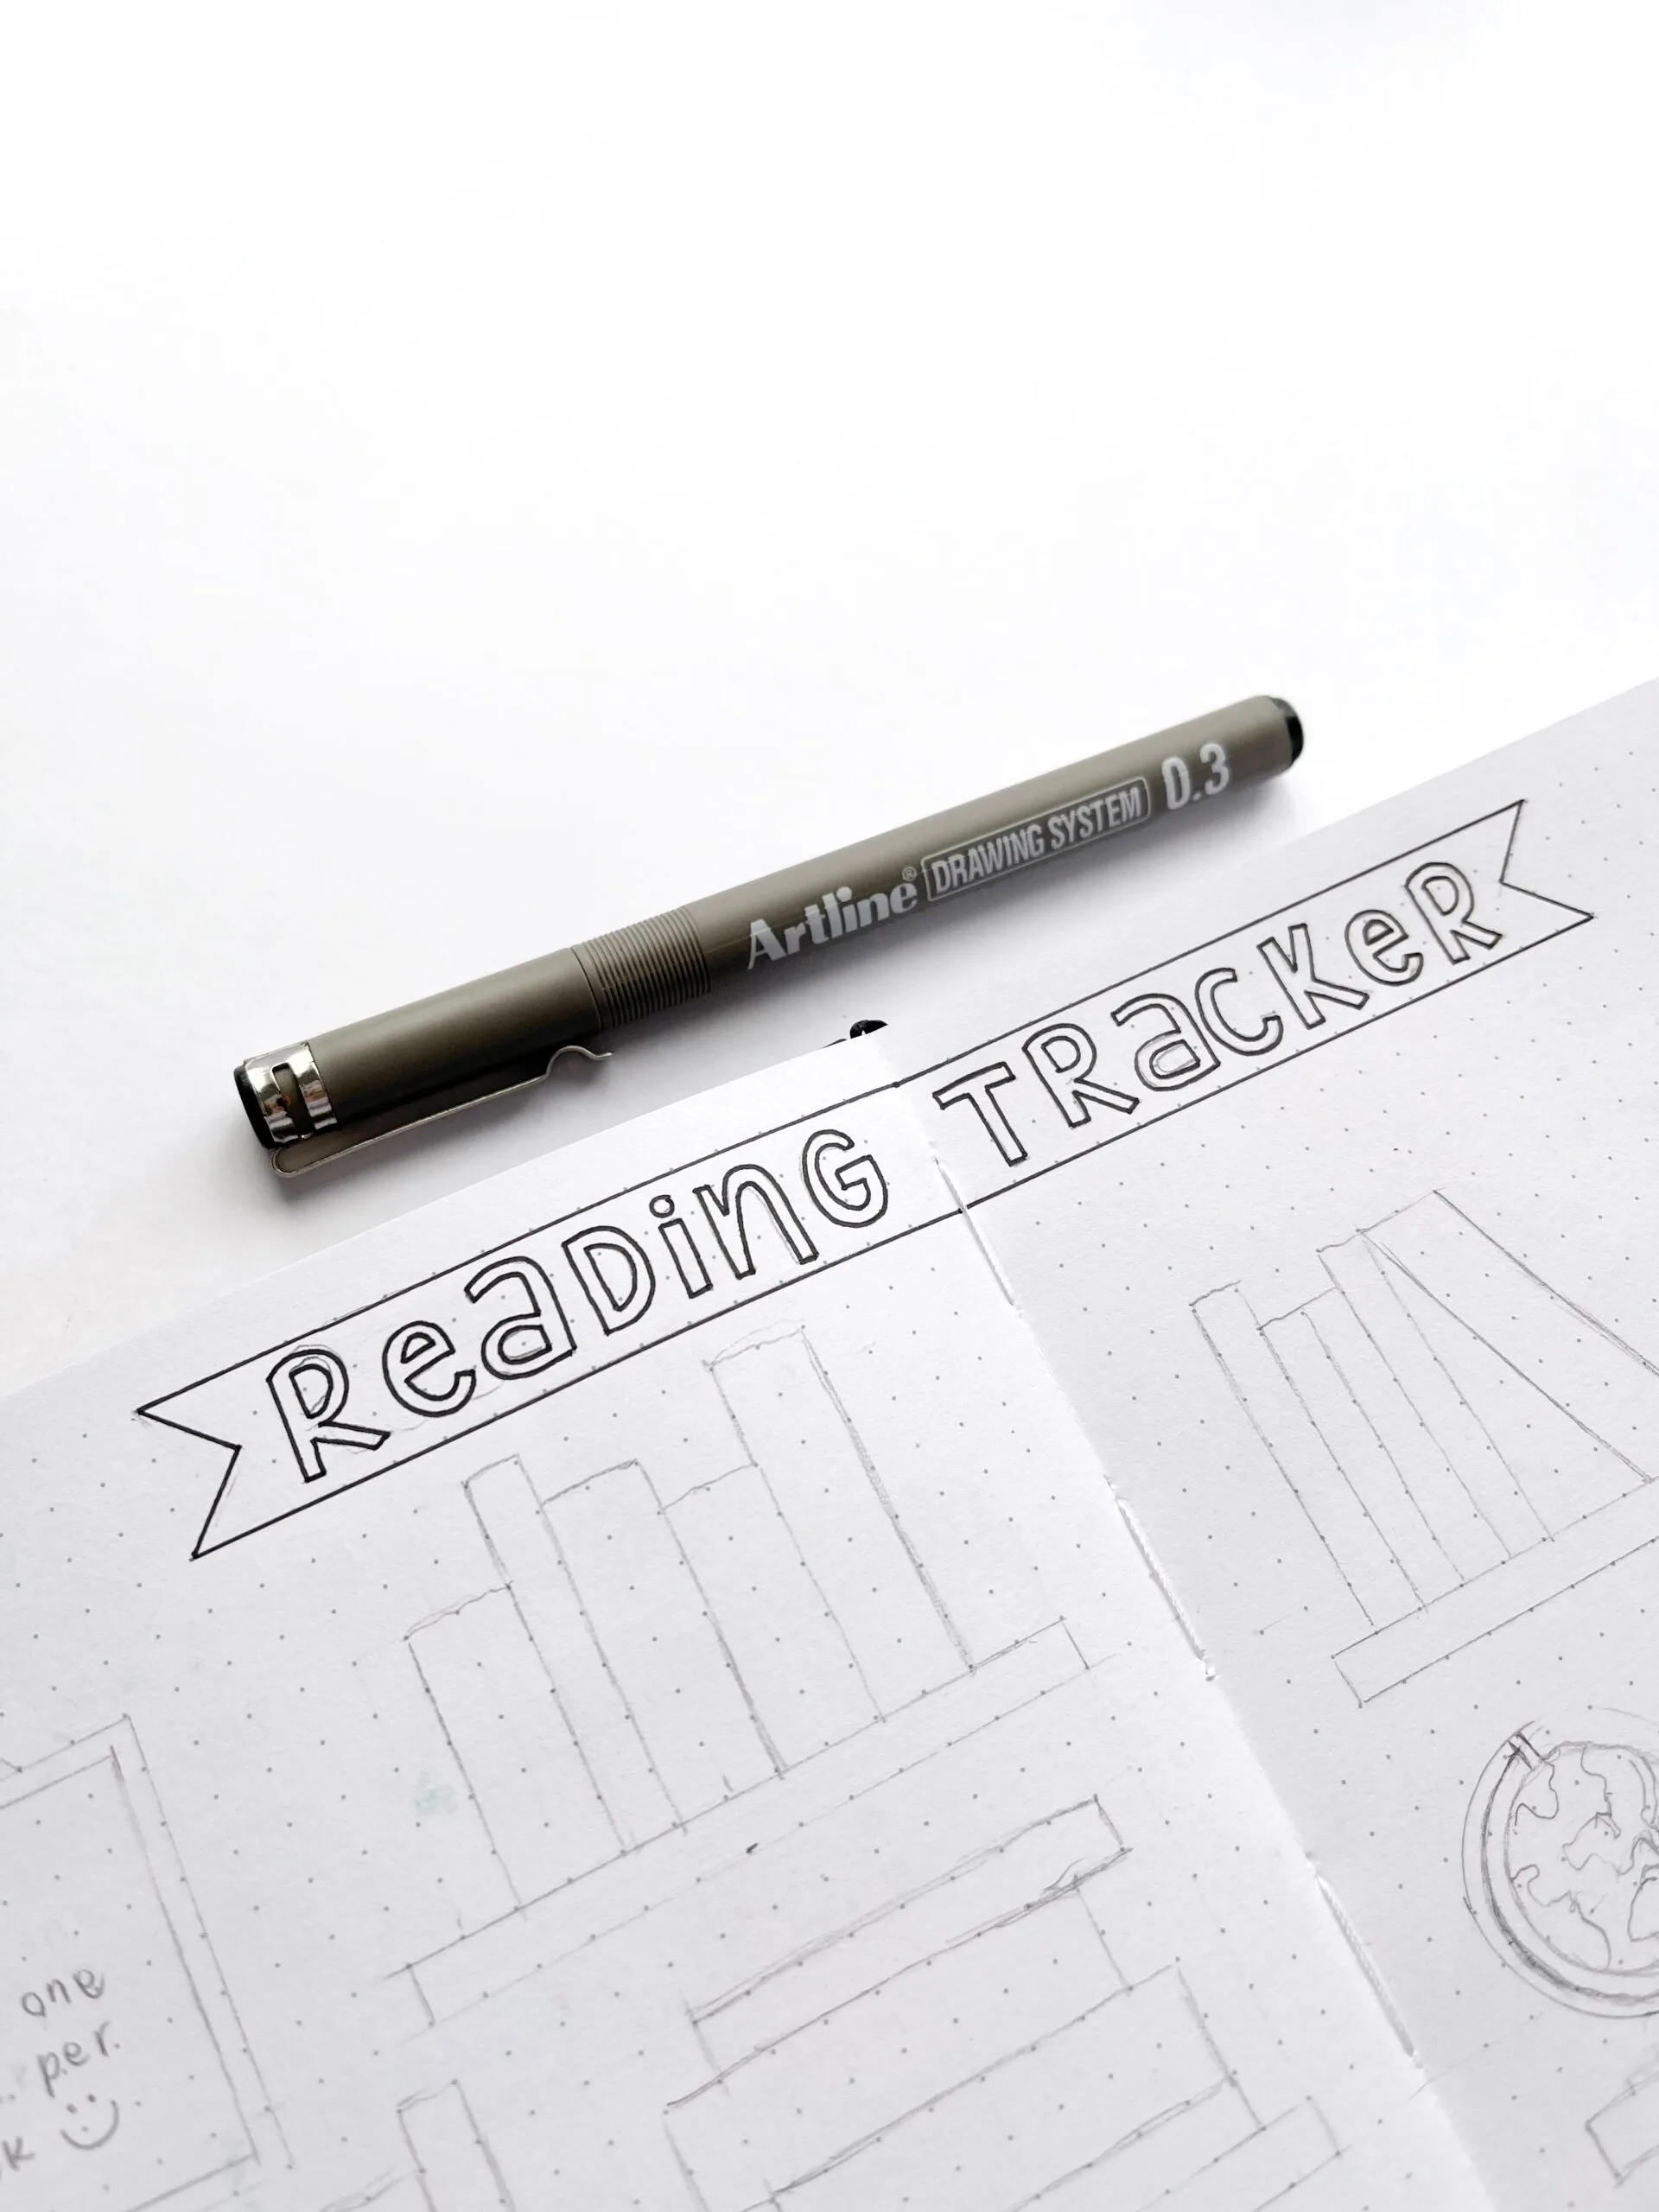 Outline of the books drawn with a pencil for the reading tracker layout.